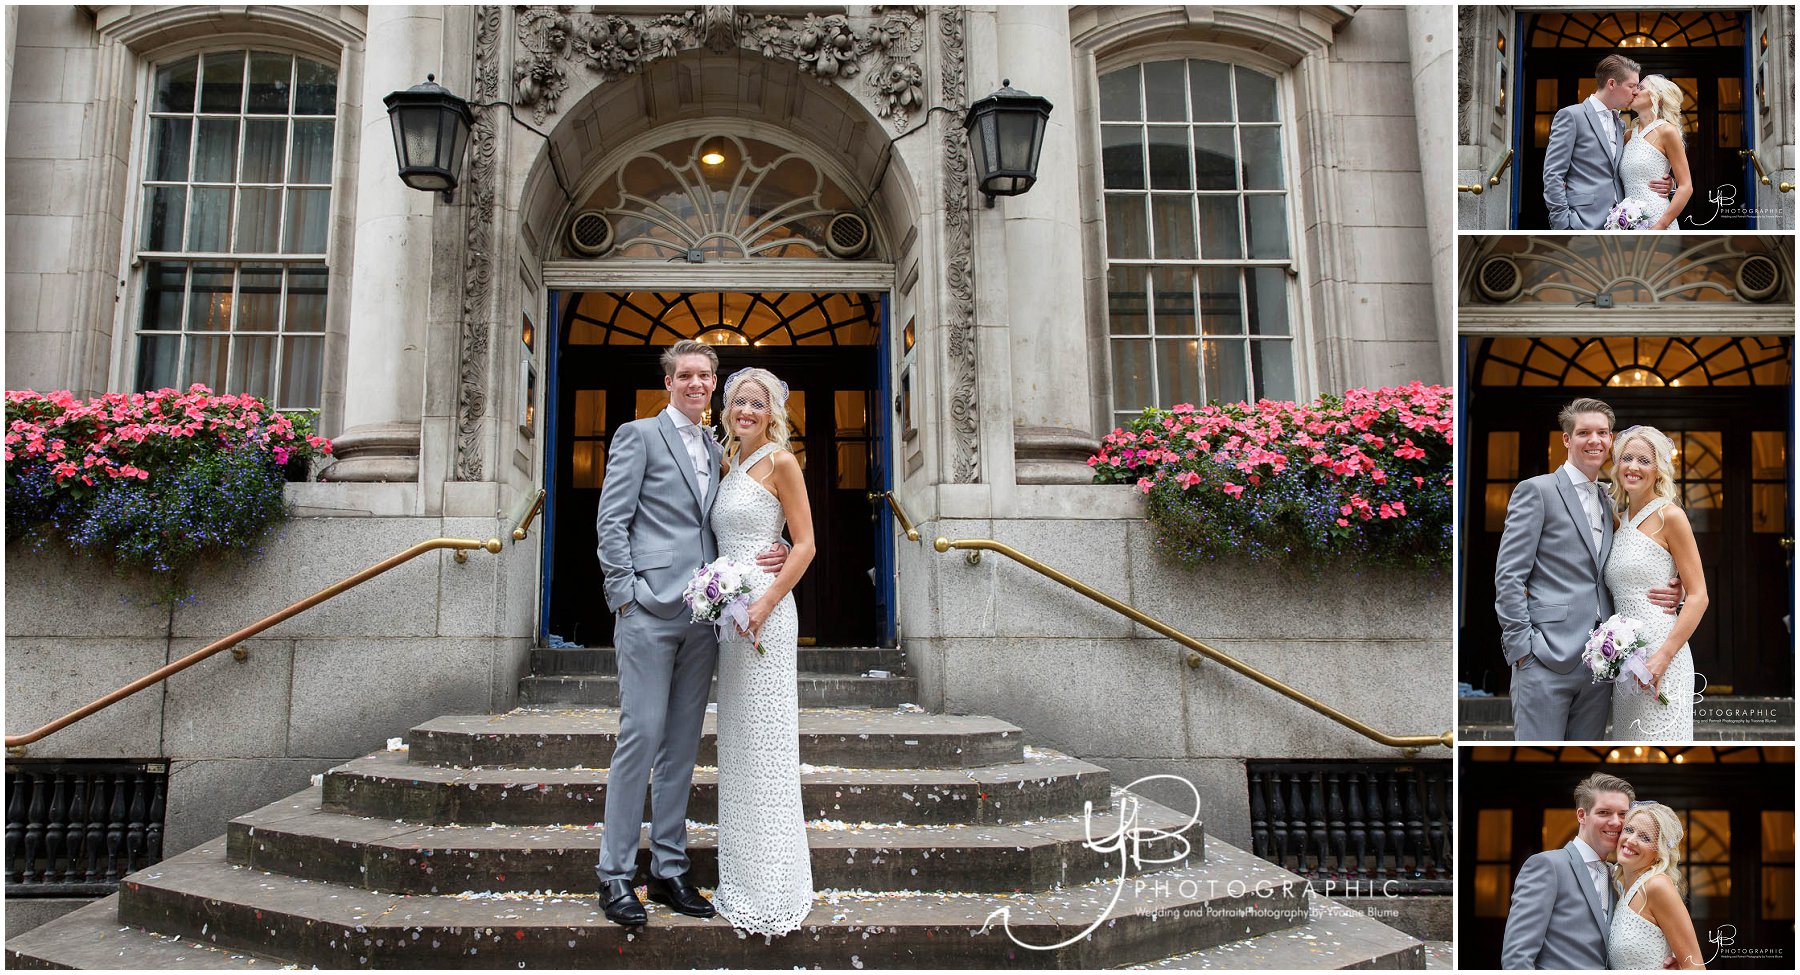 Chelsea Wedding Photographer YBPHOTOGRAPHIC captures bride and groom portraits on the famous register office steps